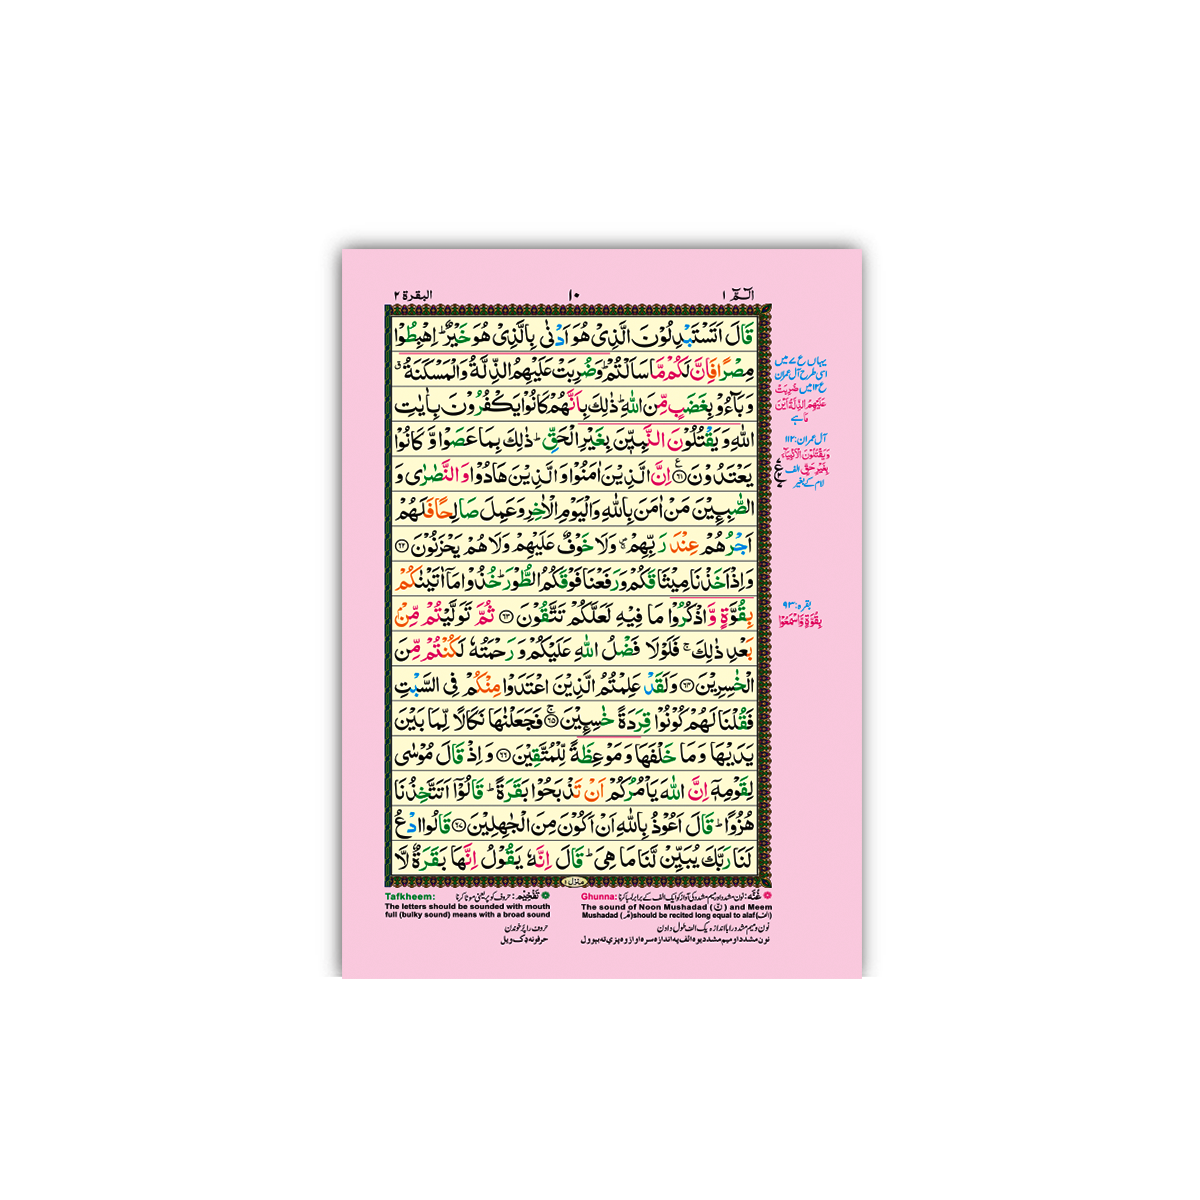 [876/4Delux] Al-Quran-Ul-Kareem In 16 Lines With Tajweed Rules (Without Translation) - Gift Edition